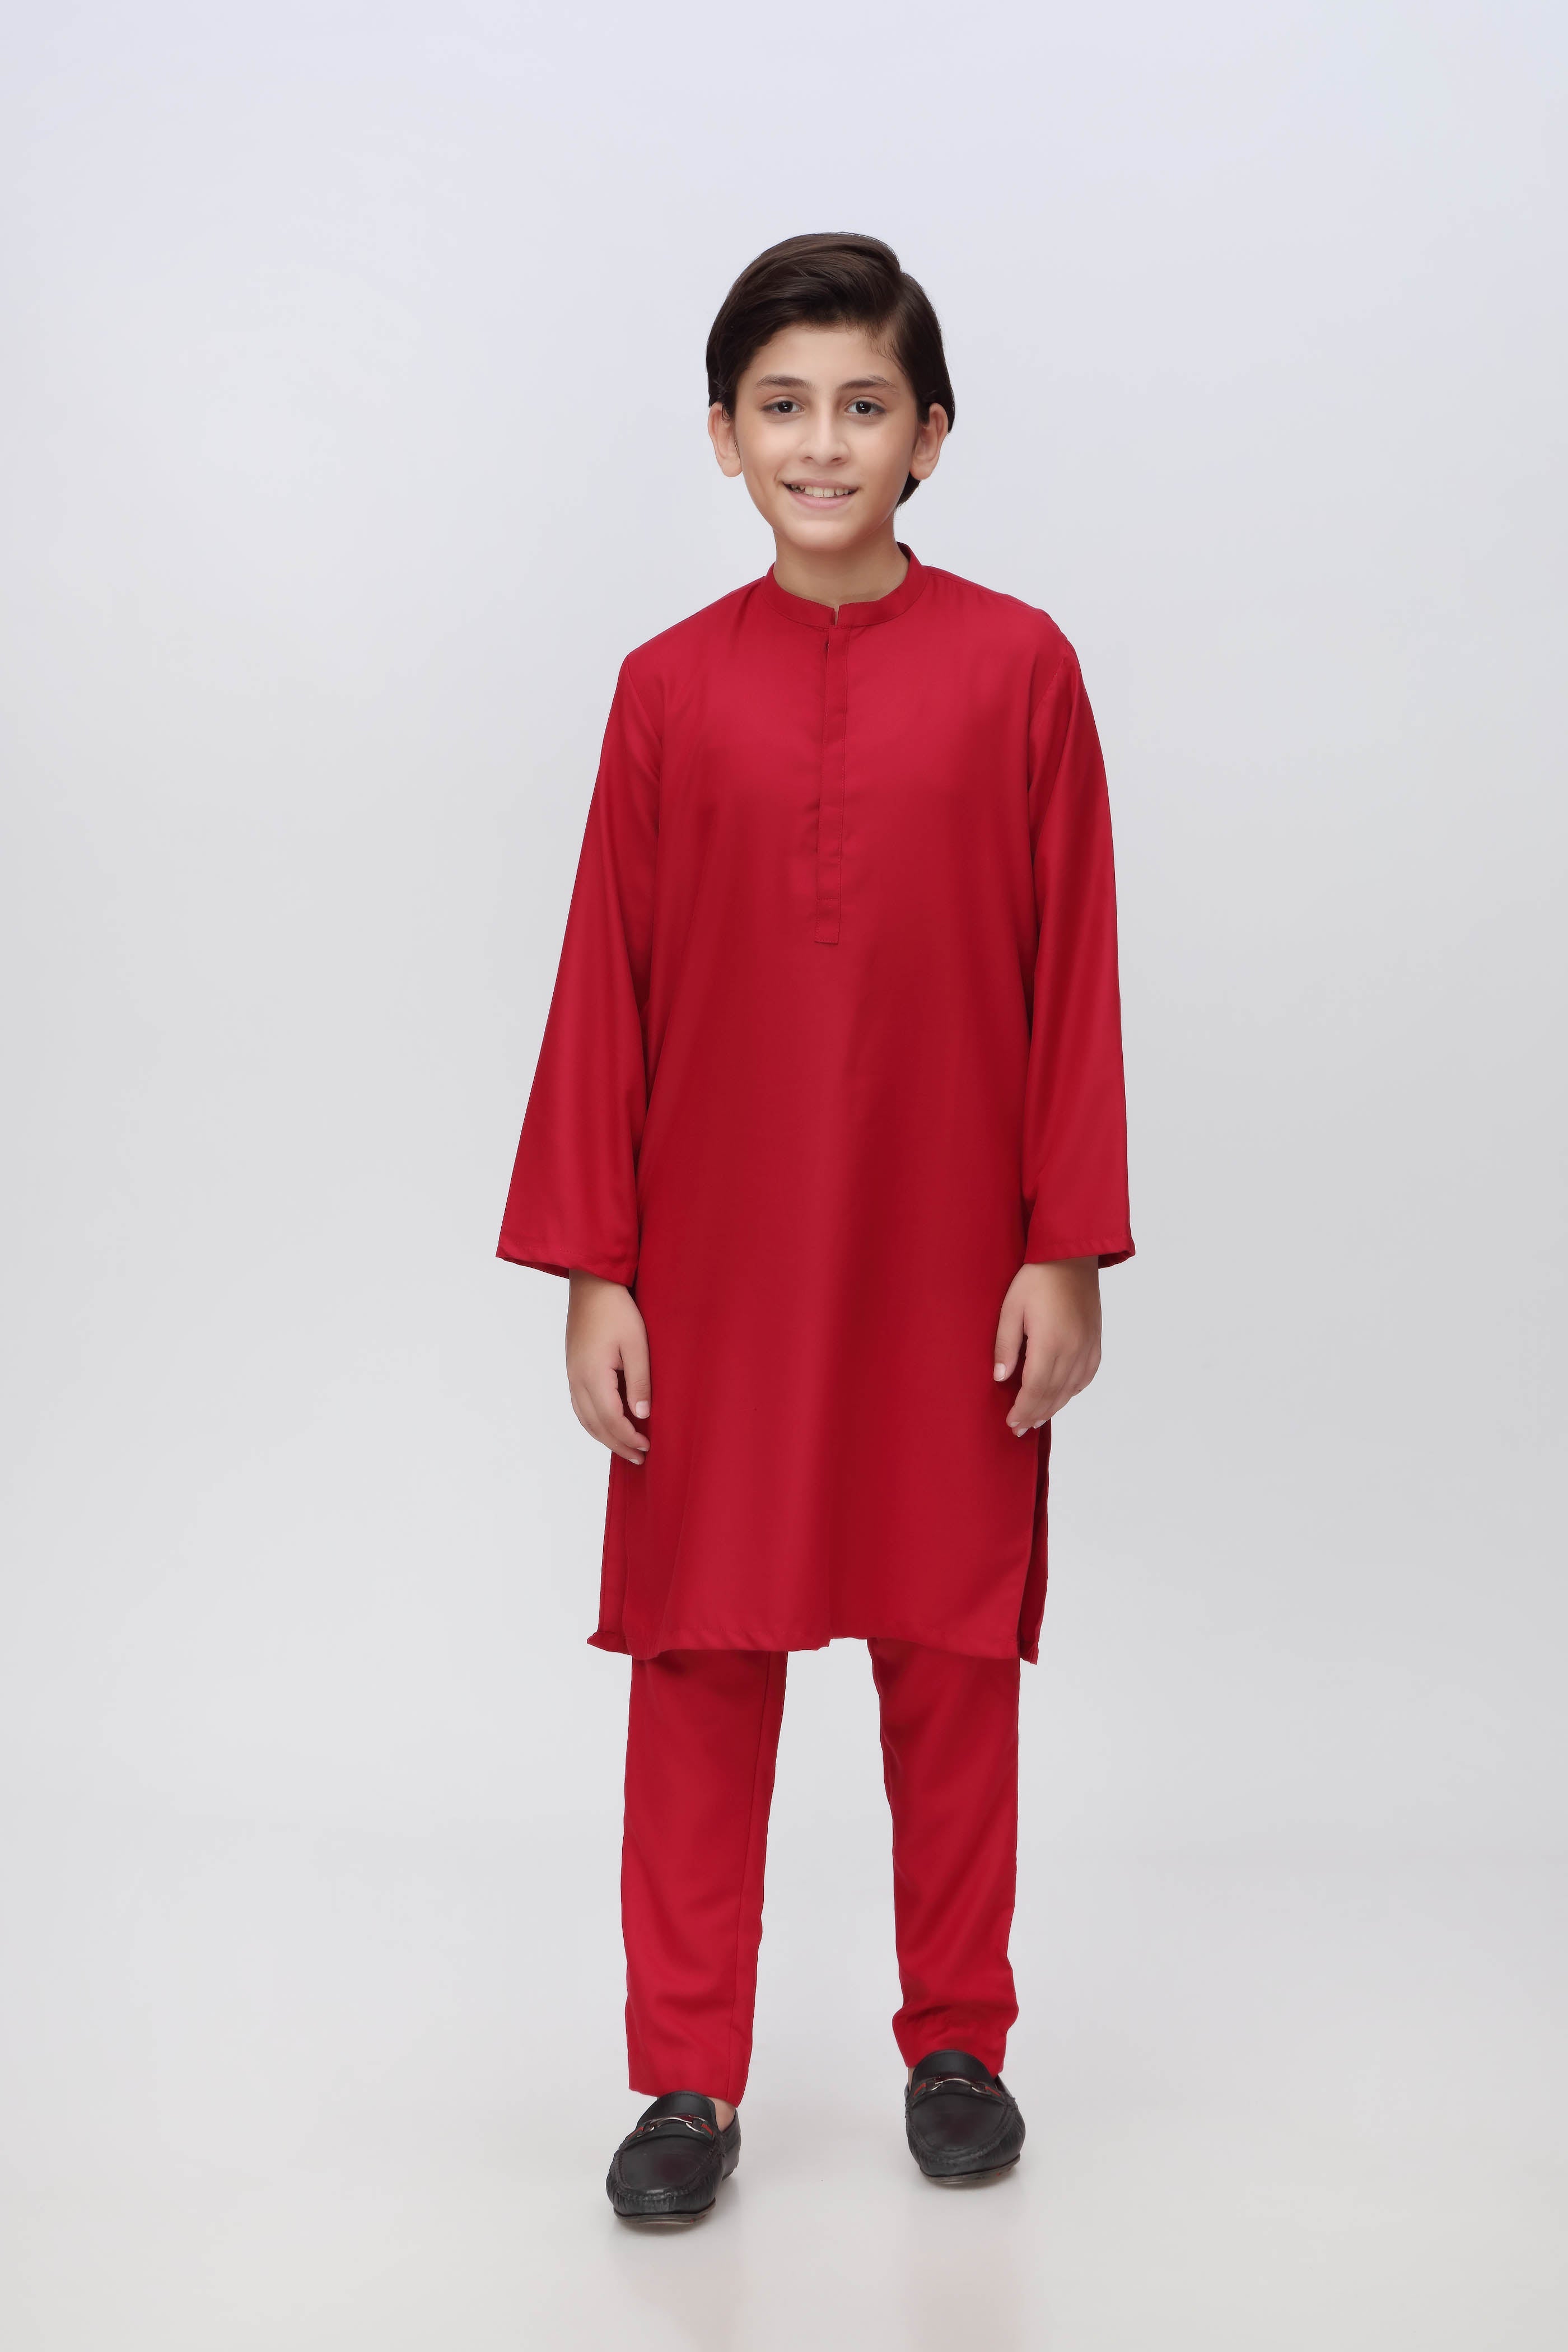 Elevate Your Child's Style with Stylish Kids Kurta Set - Buy Online Today!